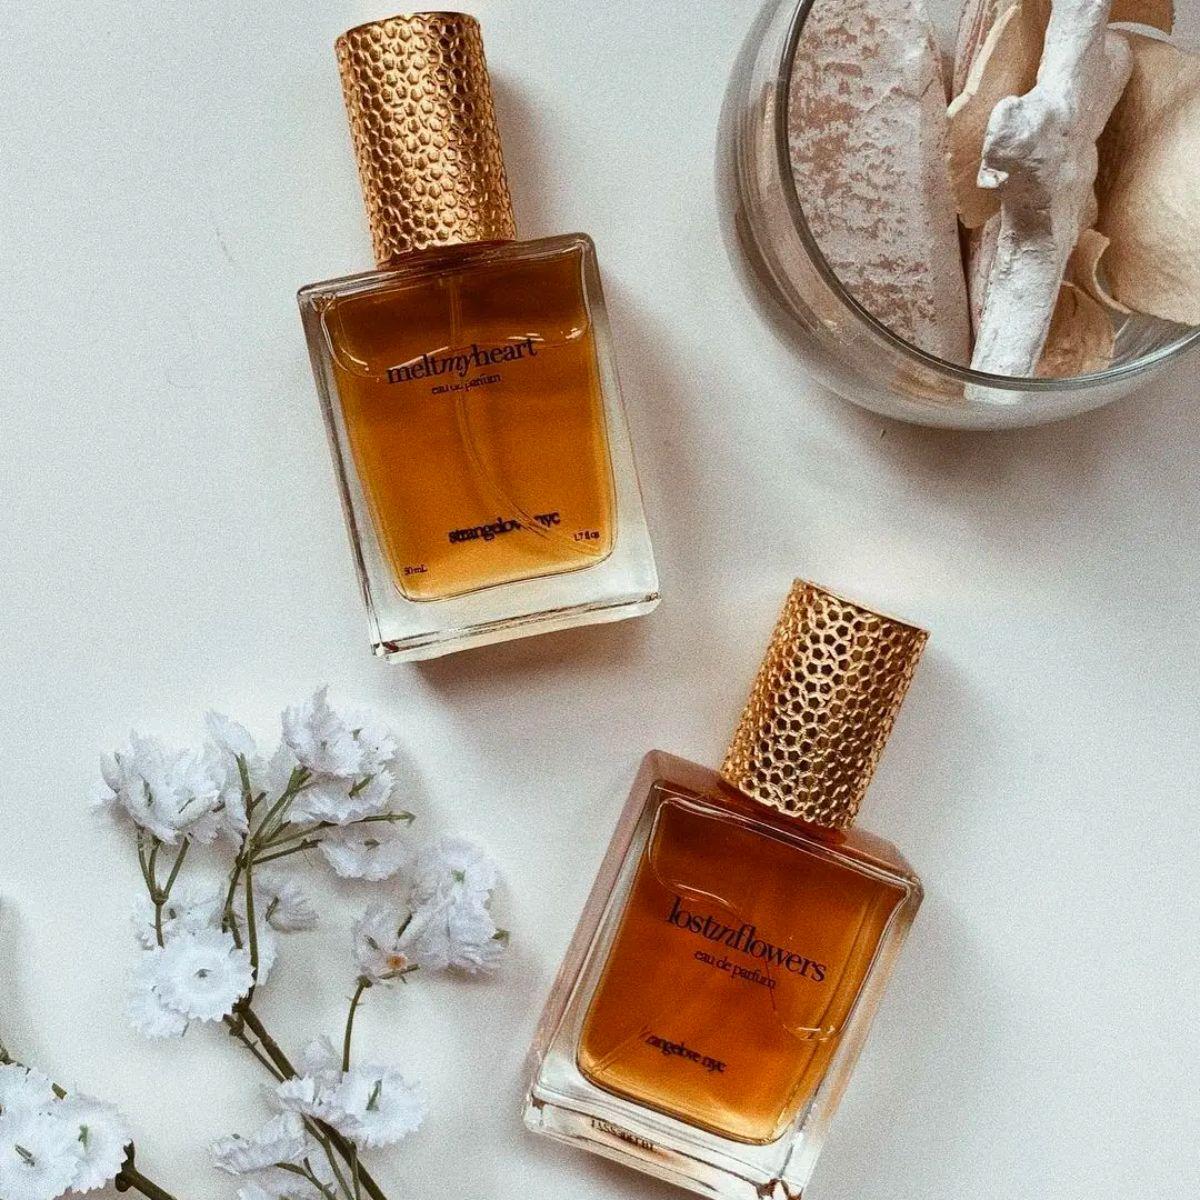 Image of the perfumes lostinflowers and meltmyheart 50 ml by the brand Strangelove